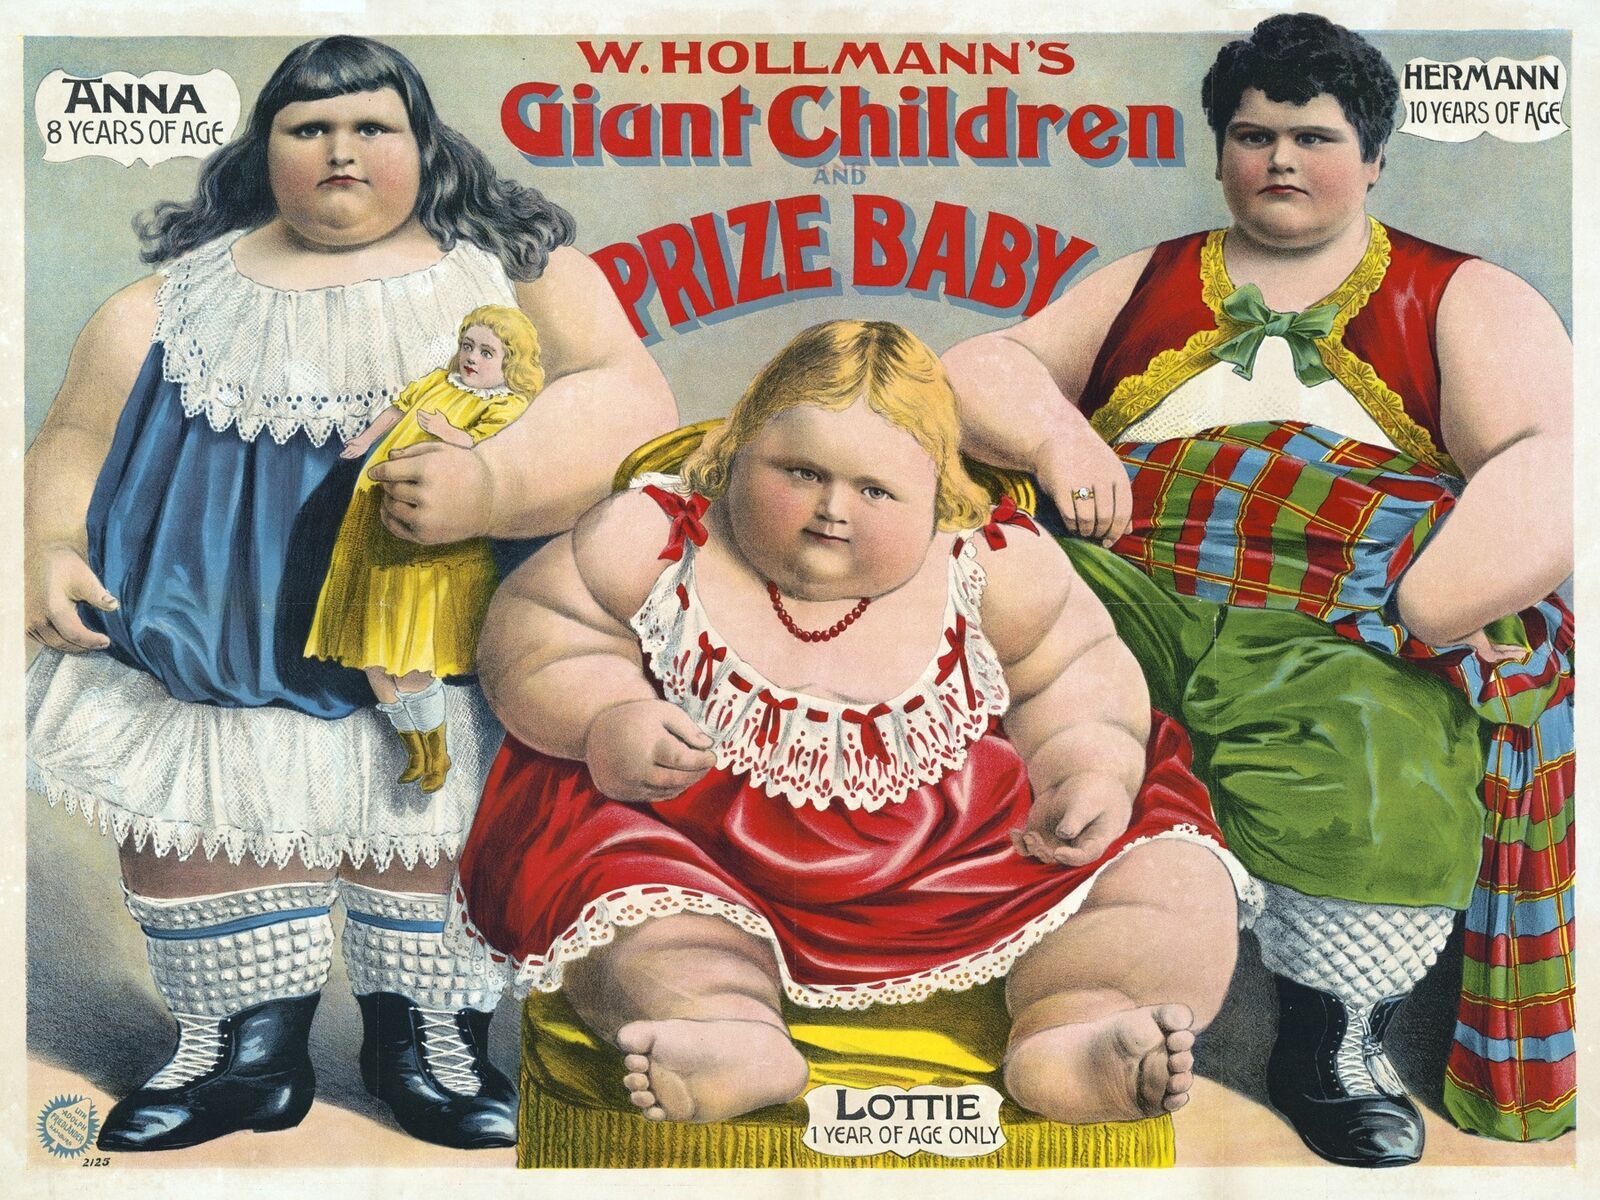 Wall Decoration Poster.Room art design.Circus fat obese girls act.Decor.11715